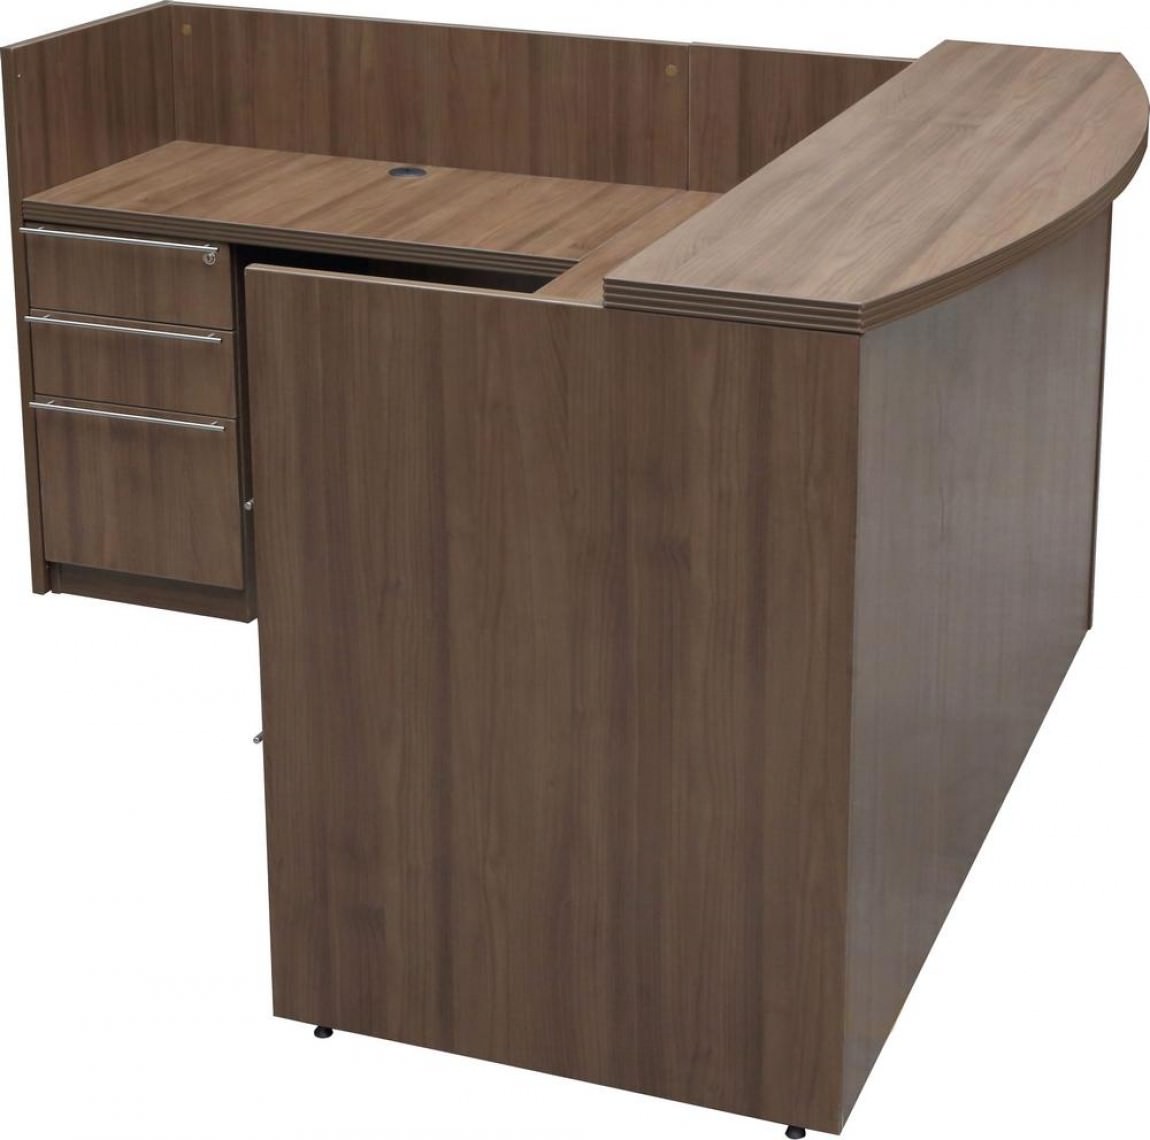 Reception Desk with Drawers